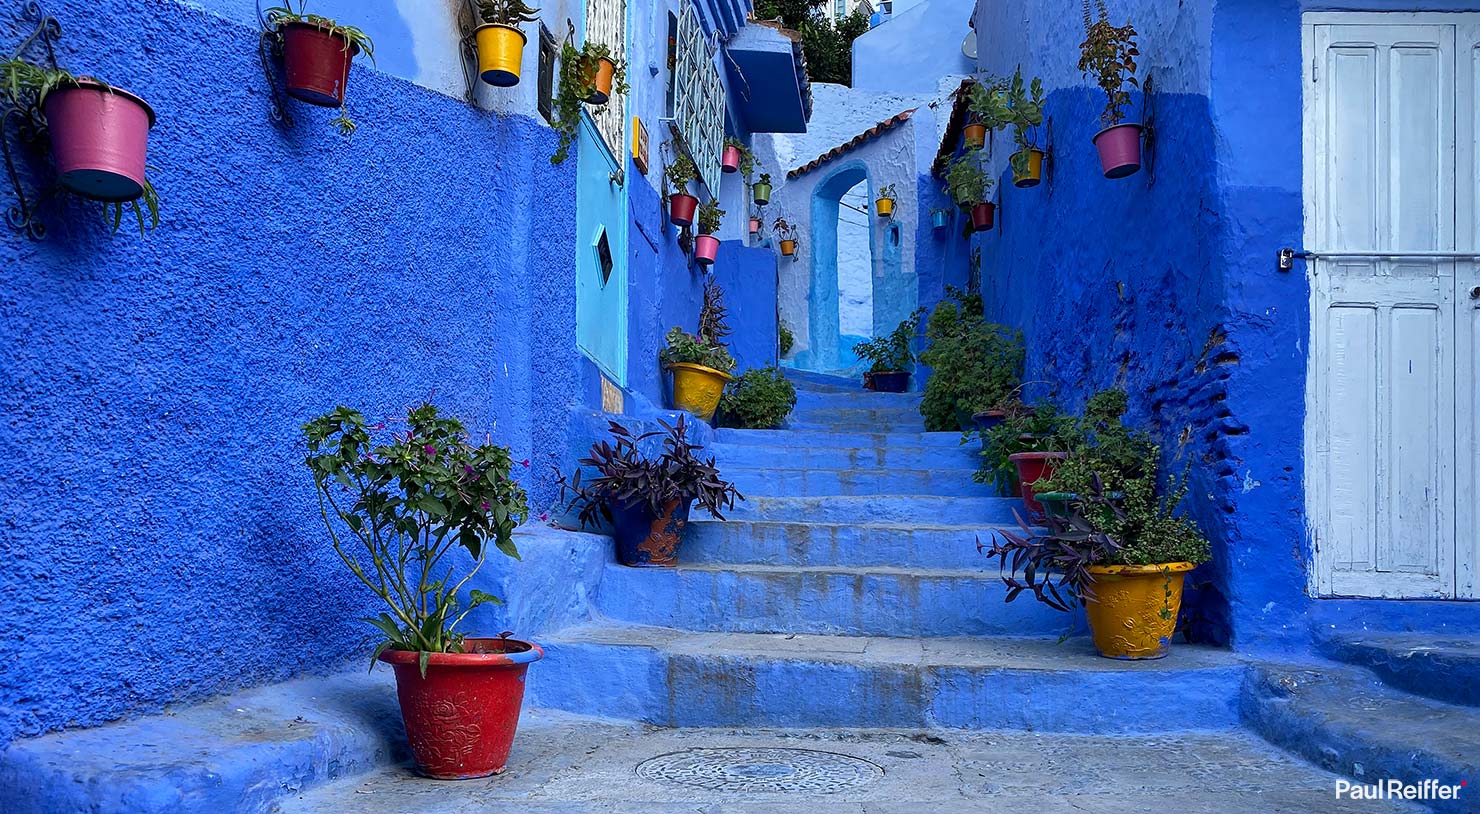 Famous Blue Steps Yellow Flowerpots Postcard Chefchaouen Morocco Locations Early Morning City Street Paul Reiffer Photographer iPhone Travel Photography Apple Landscape